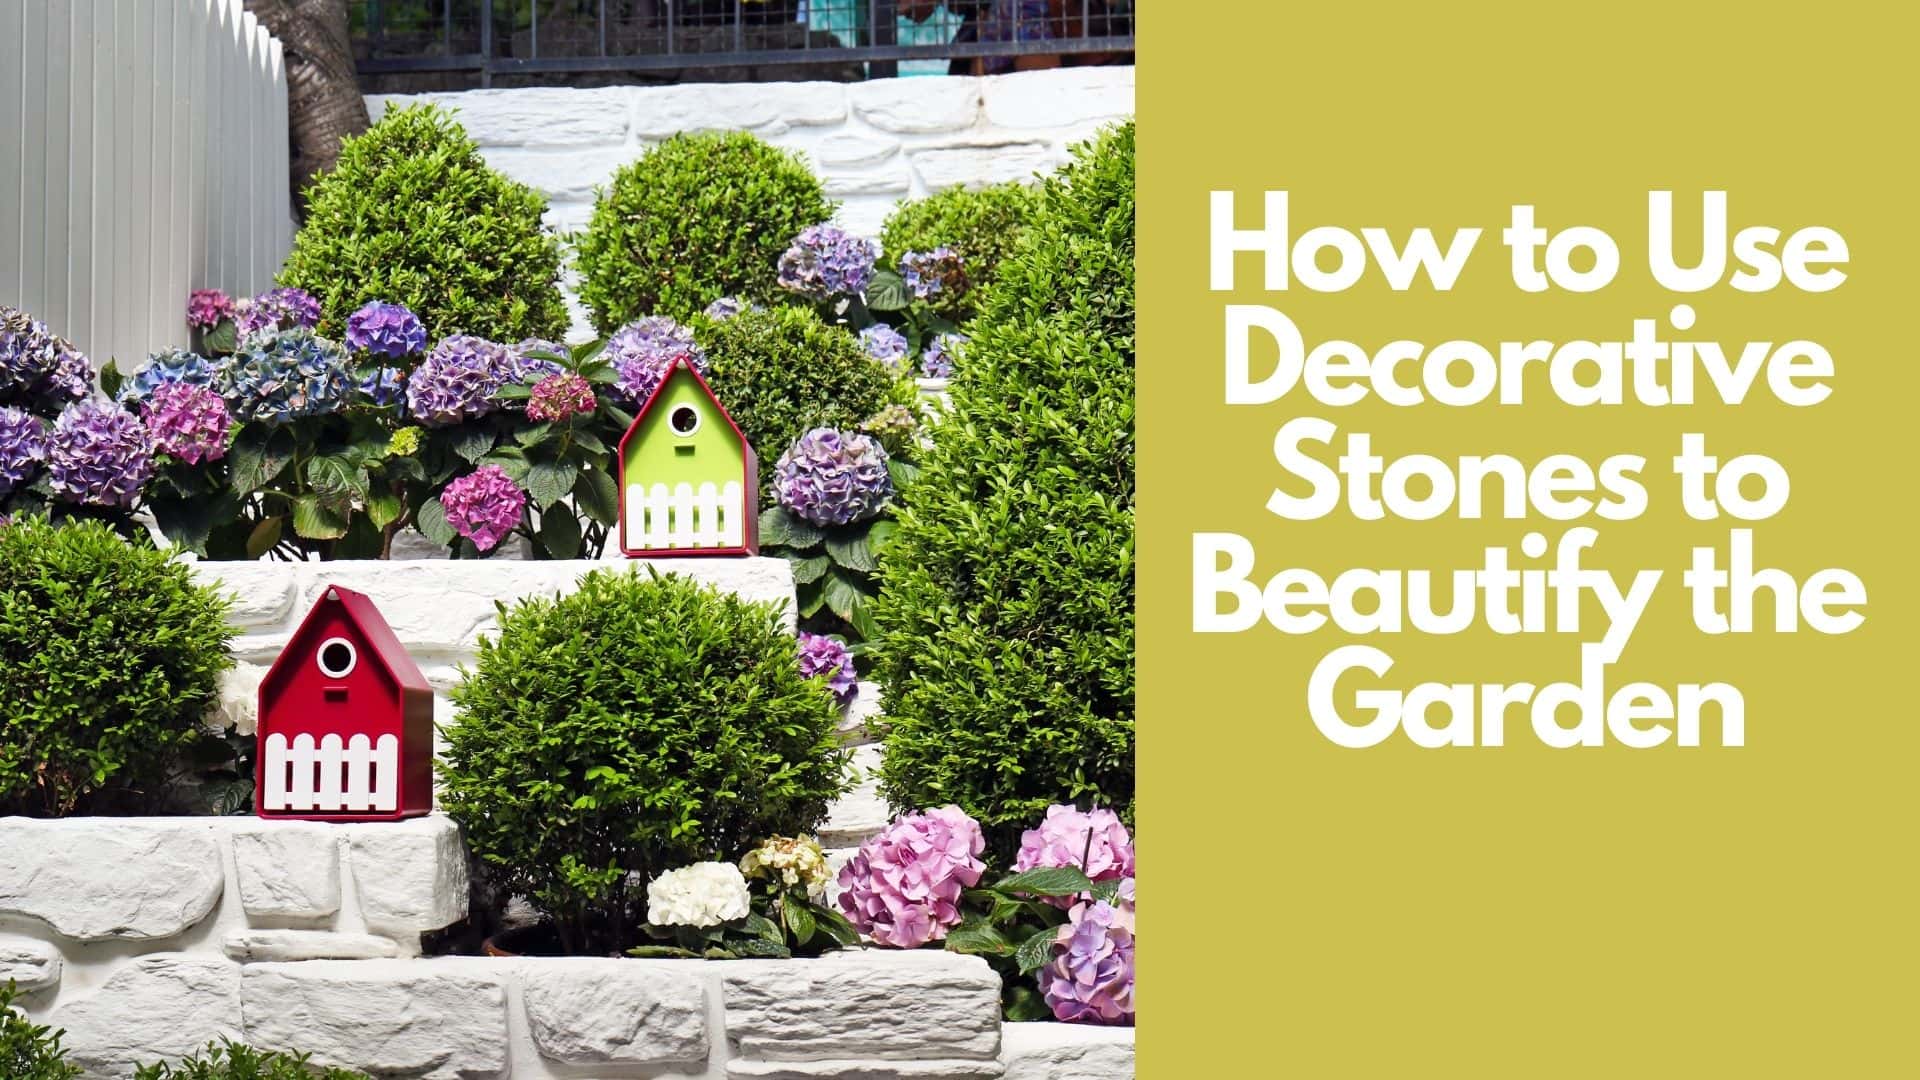 How to Use Decorative Stones to Beautify the Garden